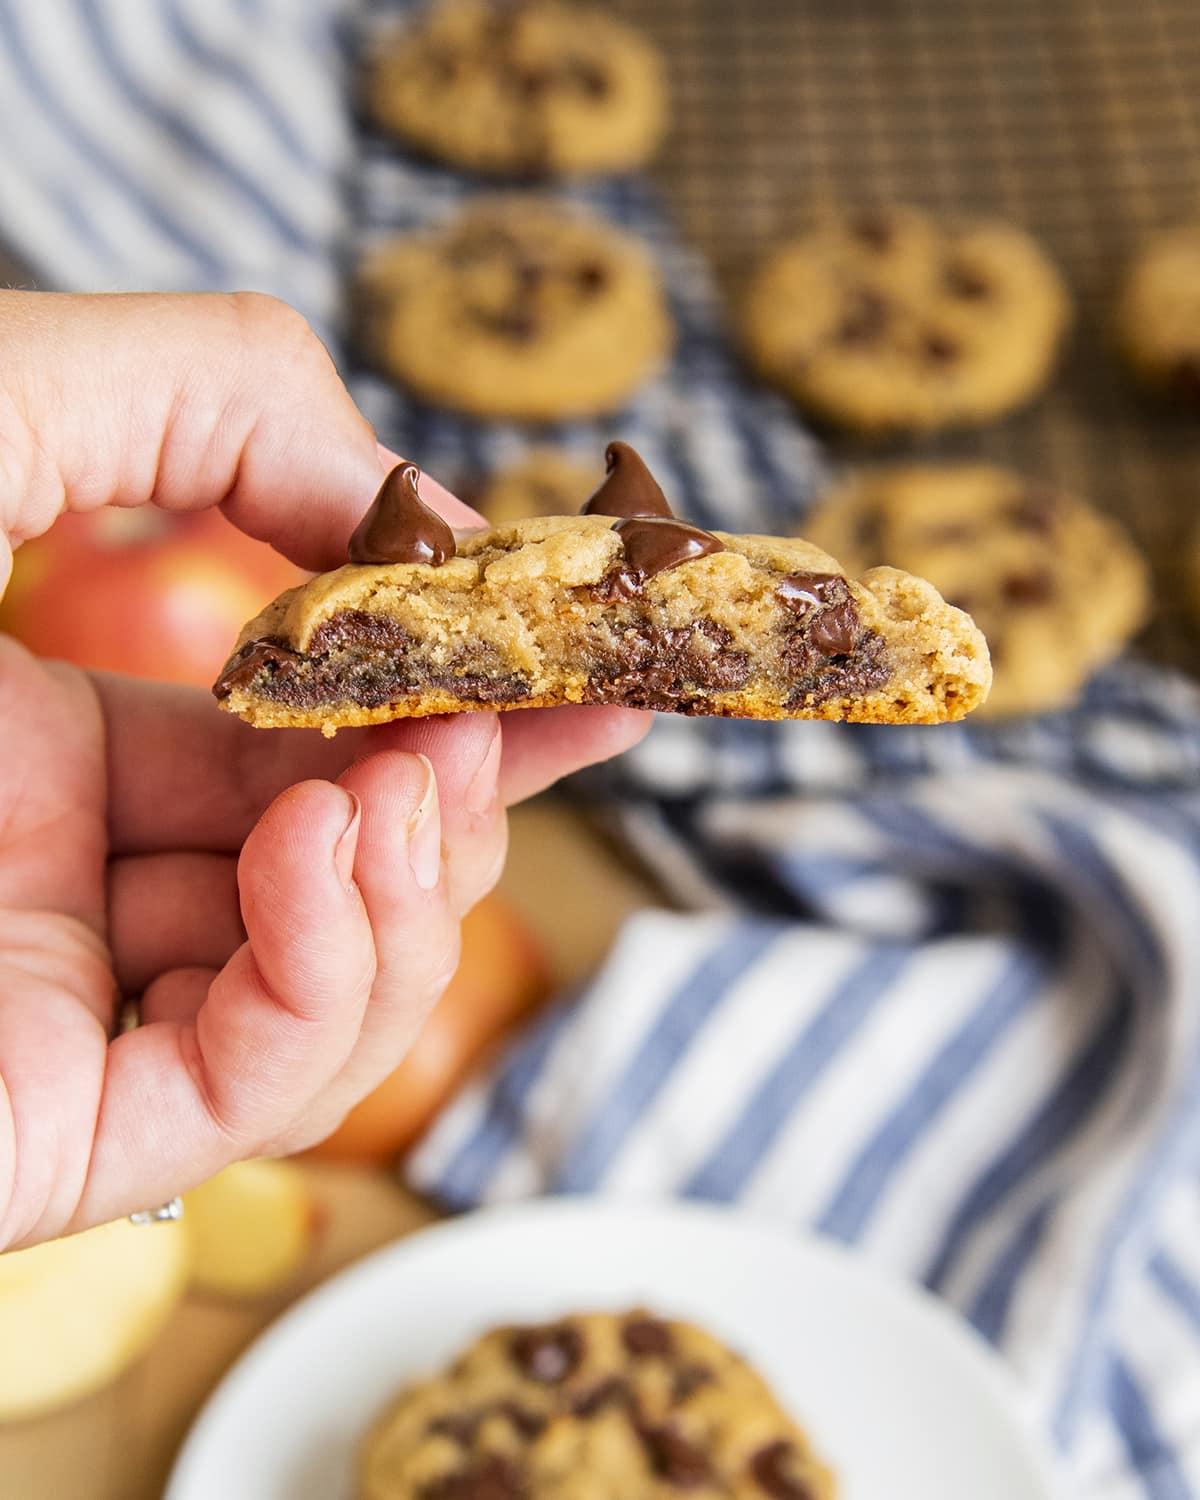 A hand holding half an applesauce chocolate chip cookie, showing the middle of the gooey cookie.